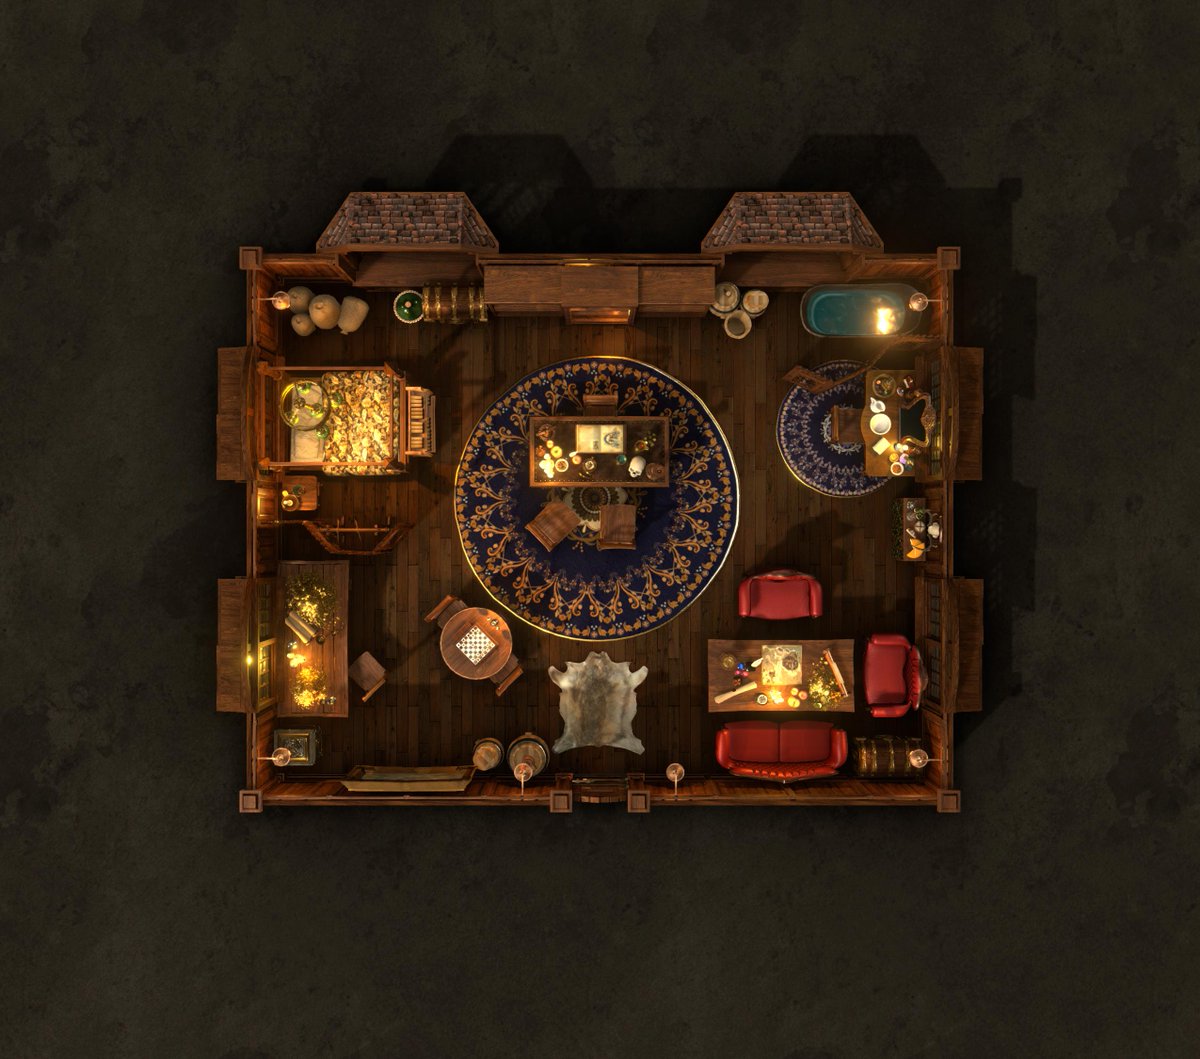 This is just a sampling of what you can make in Dungeon Alchemist, the 3D mapmaking software. All your maps can look top notch once you learn the ropes. Check it out over on Steam: store.steampowered.com/app/1588530/Du…